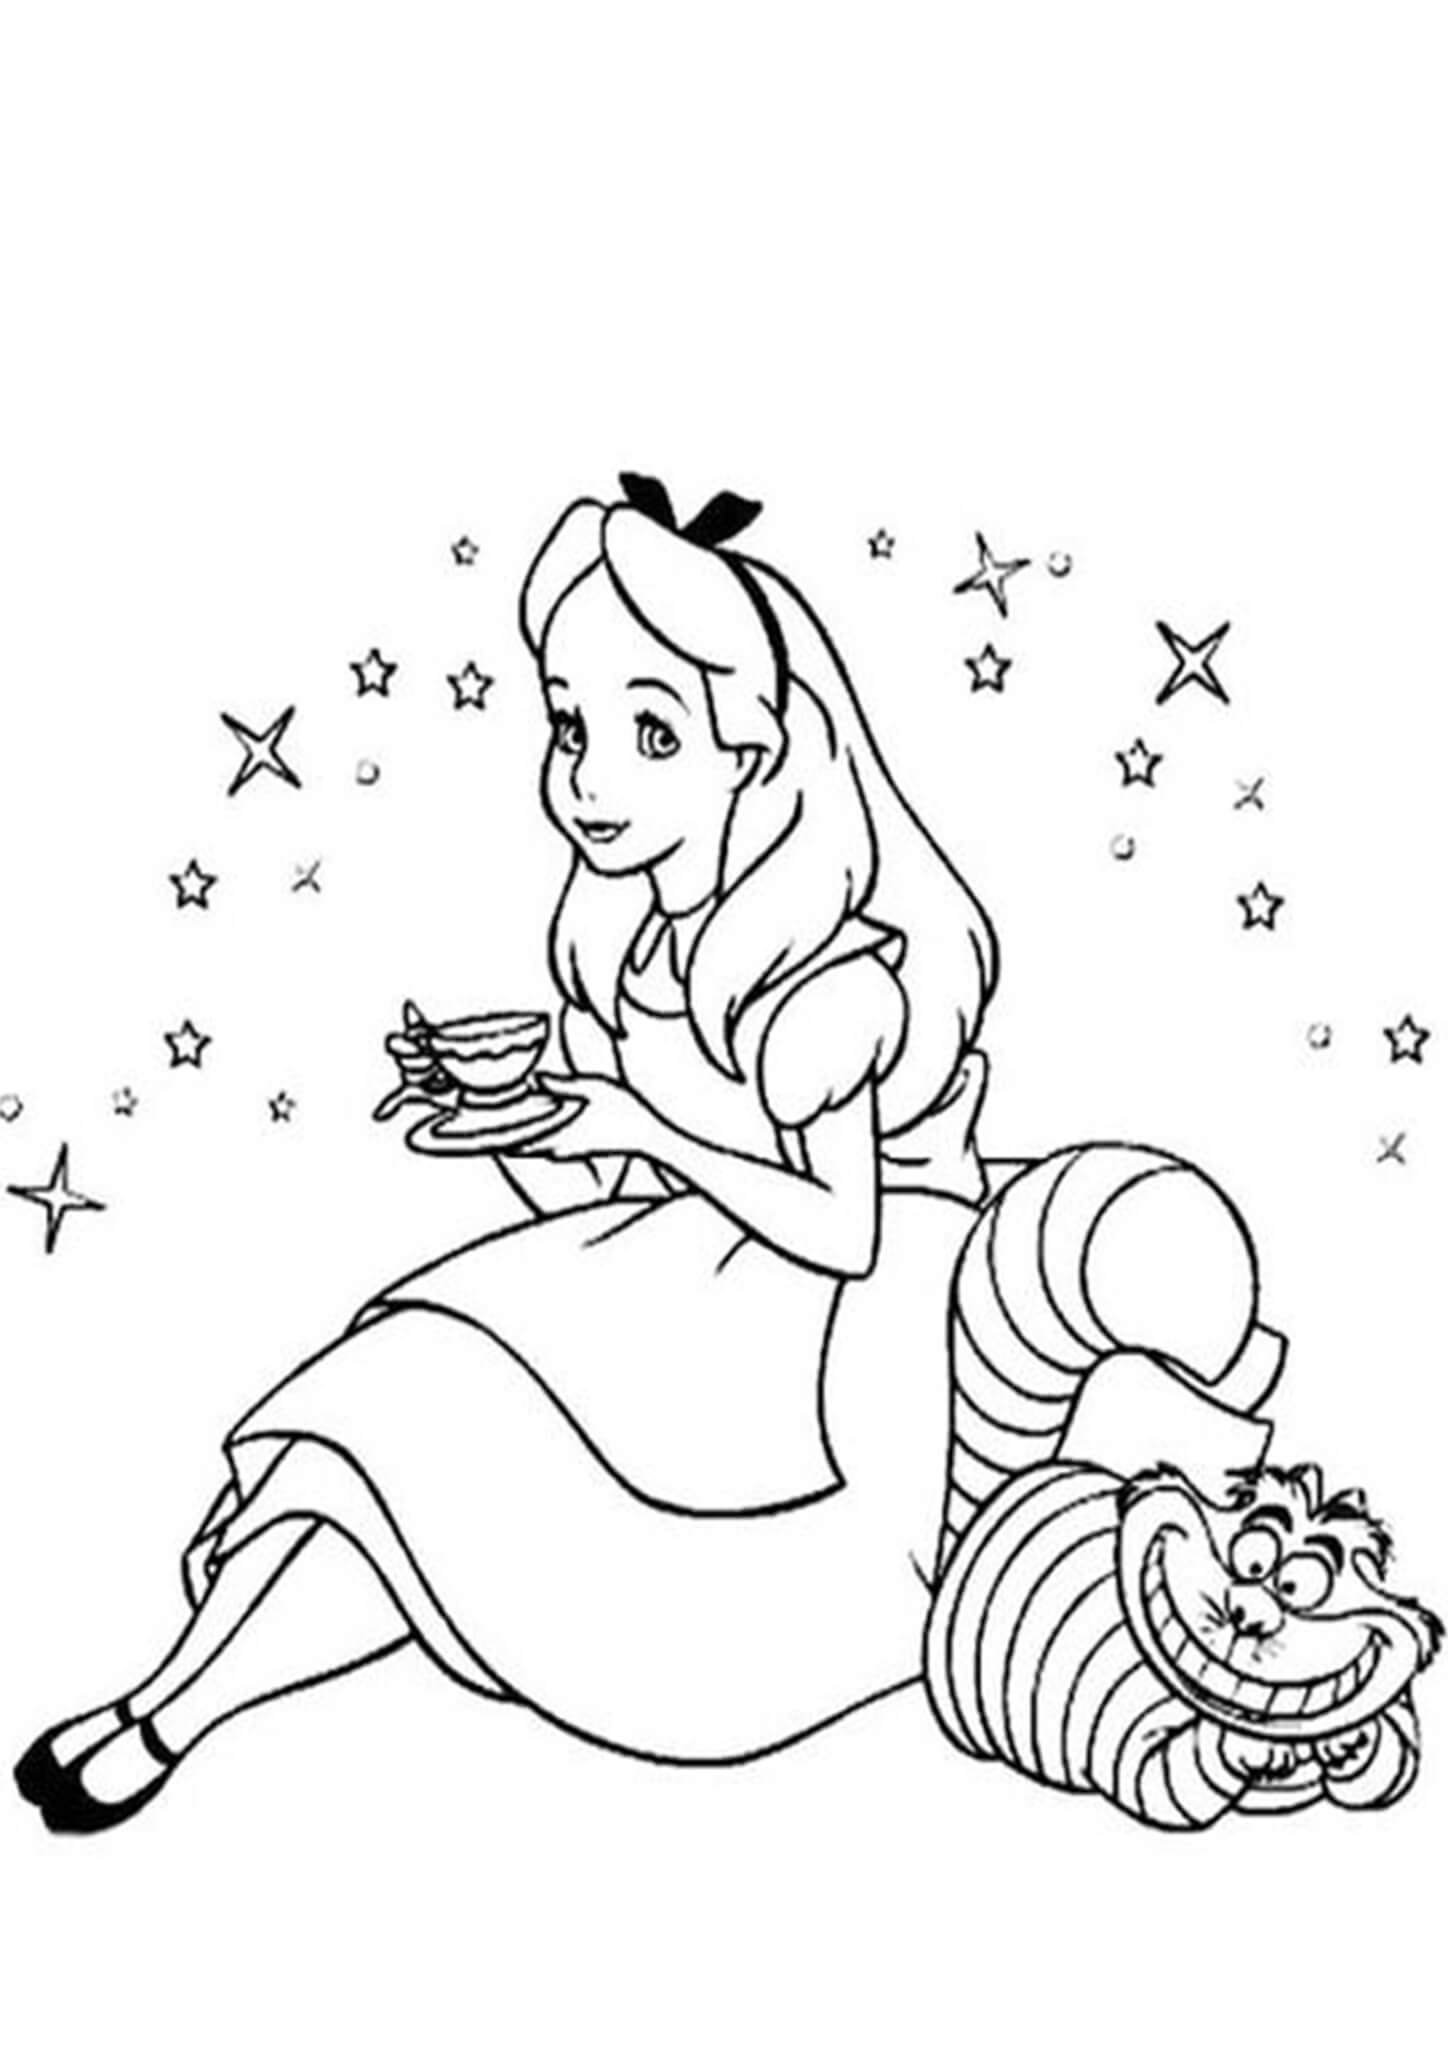 Free & Easy To Print Alice in Wonderland Coloring Pages   Tulamama